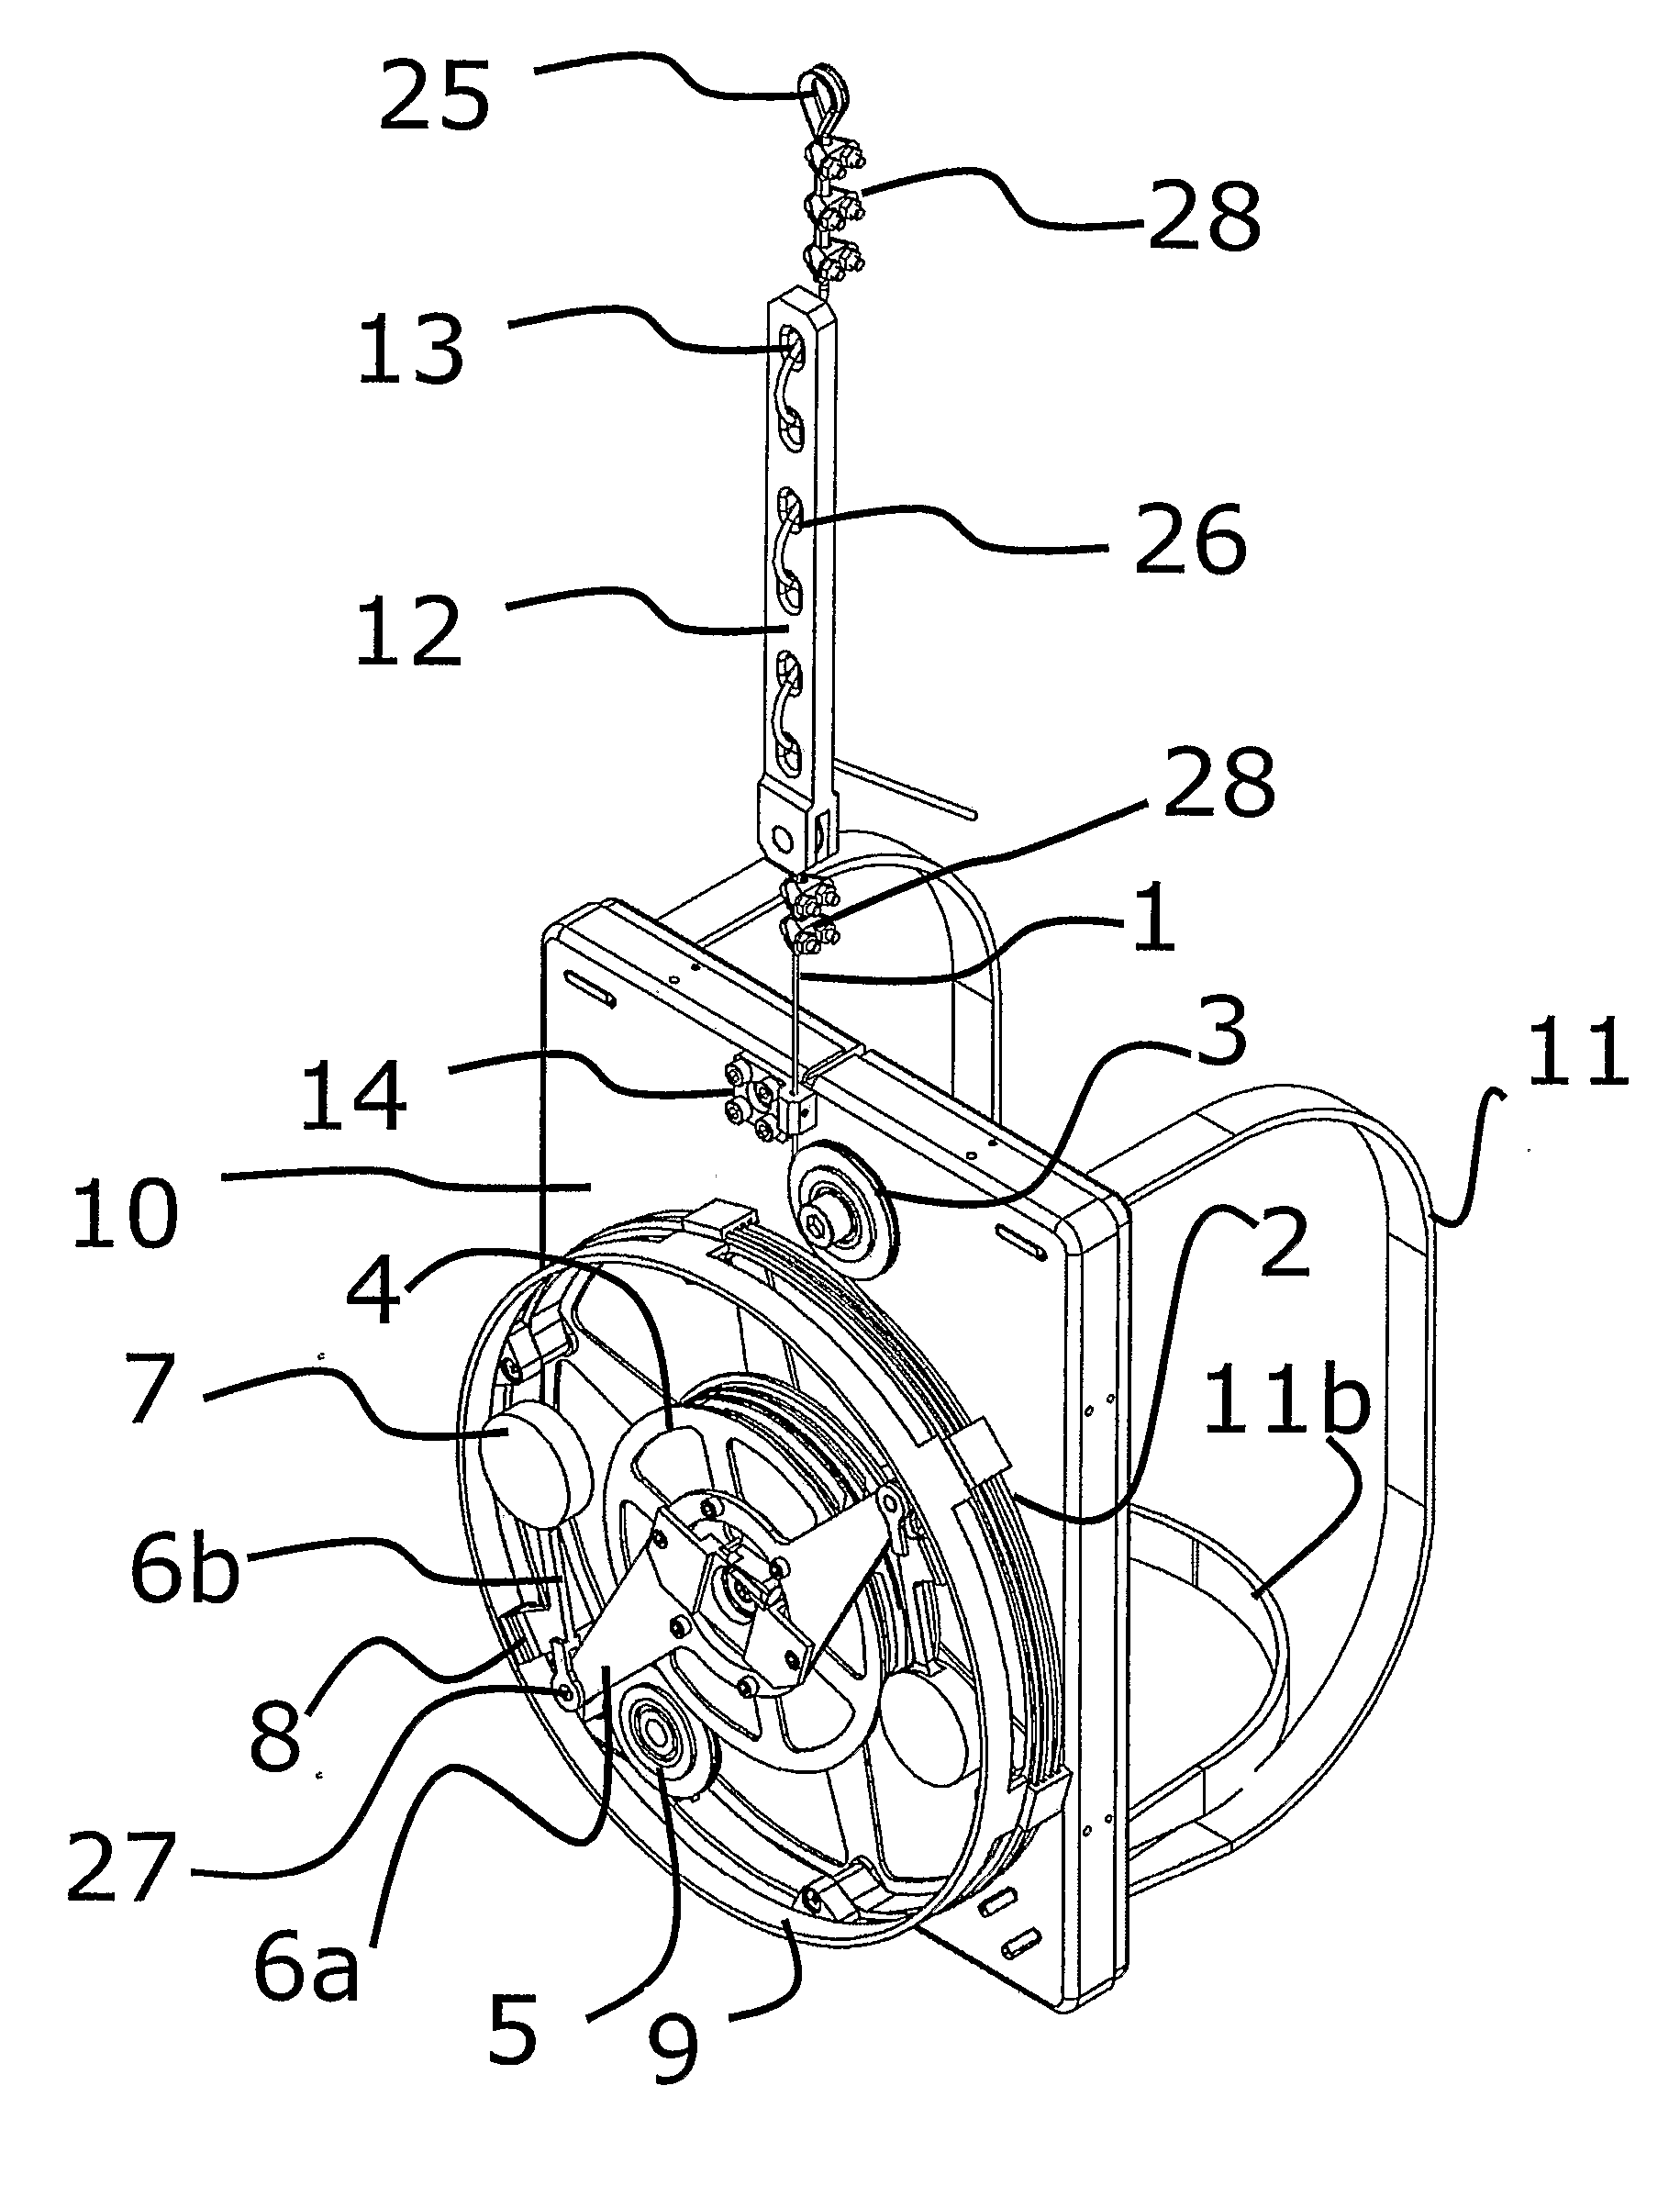 Portable Apparatus for Controlled Descent